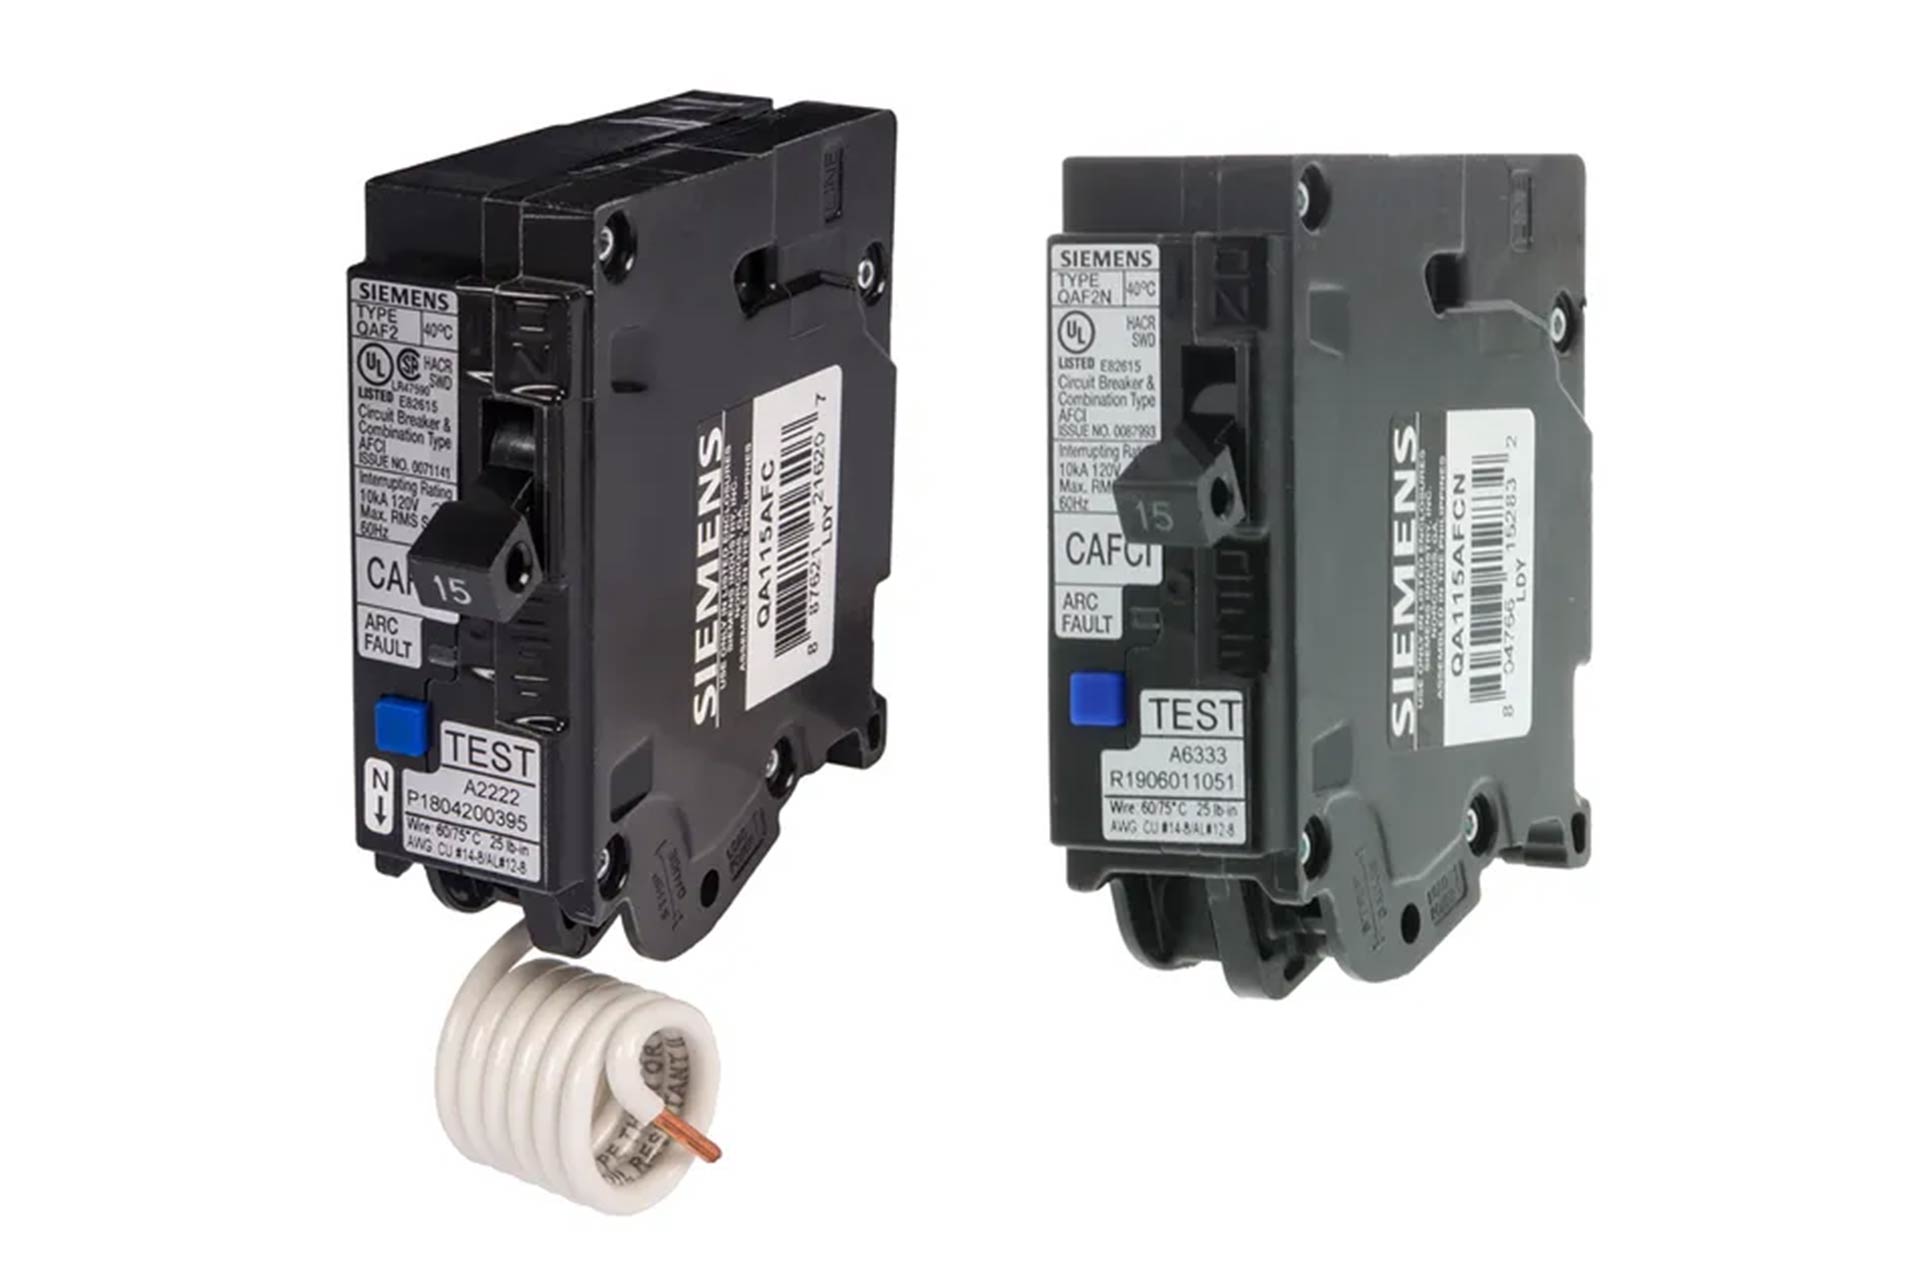 15 Amp Circuit Breakers: Common Uses and Installation Tips